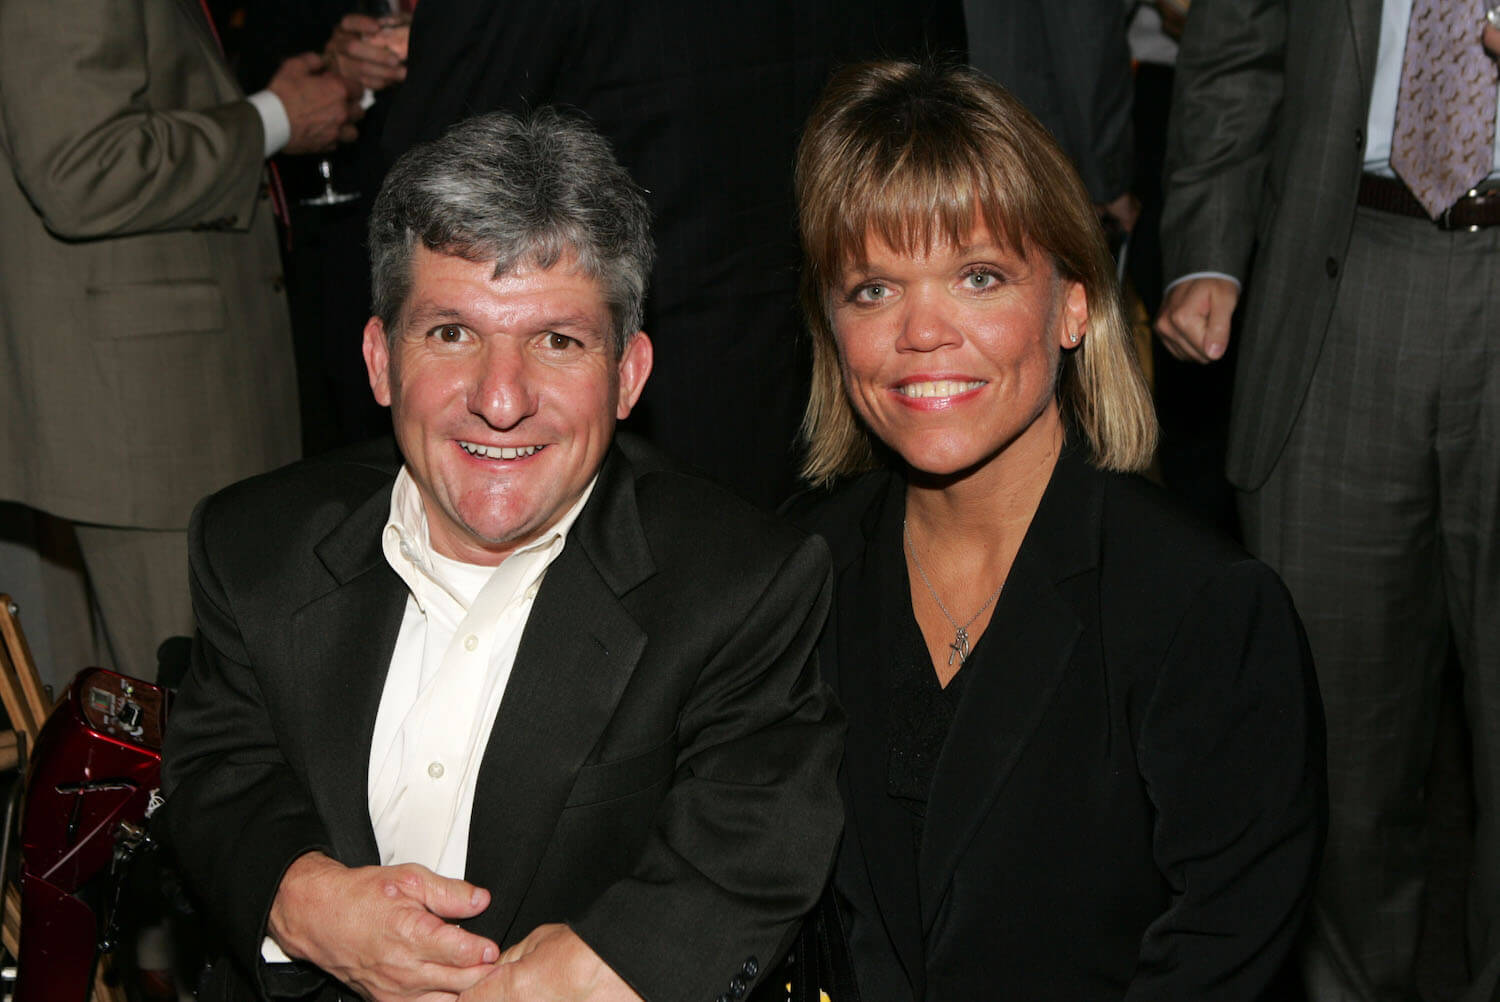 Matt Roloff and Amy Roloff from 'Little People, Big World' sitting next to each other and smiling against a black background